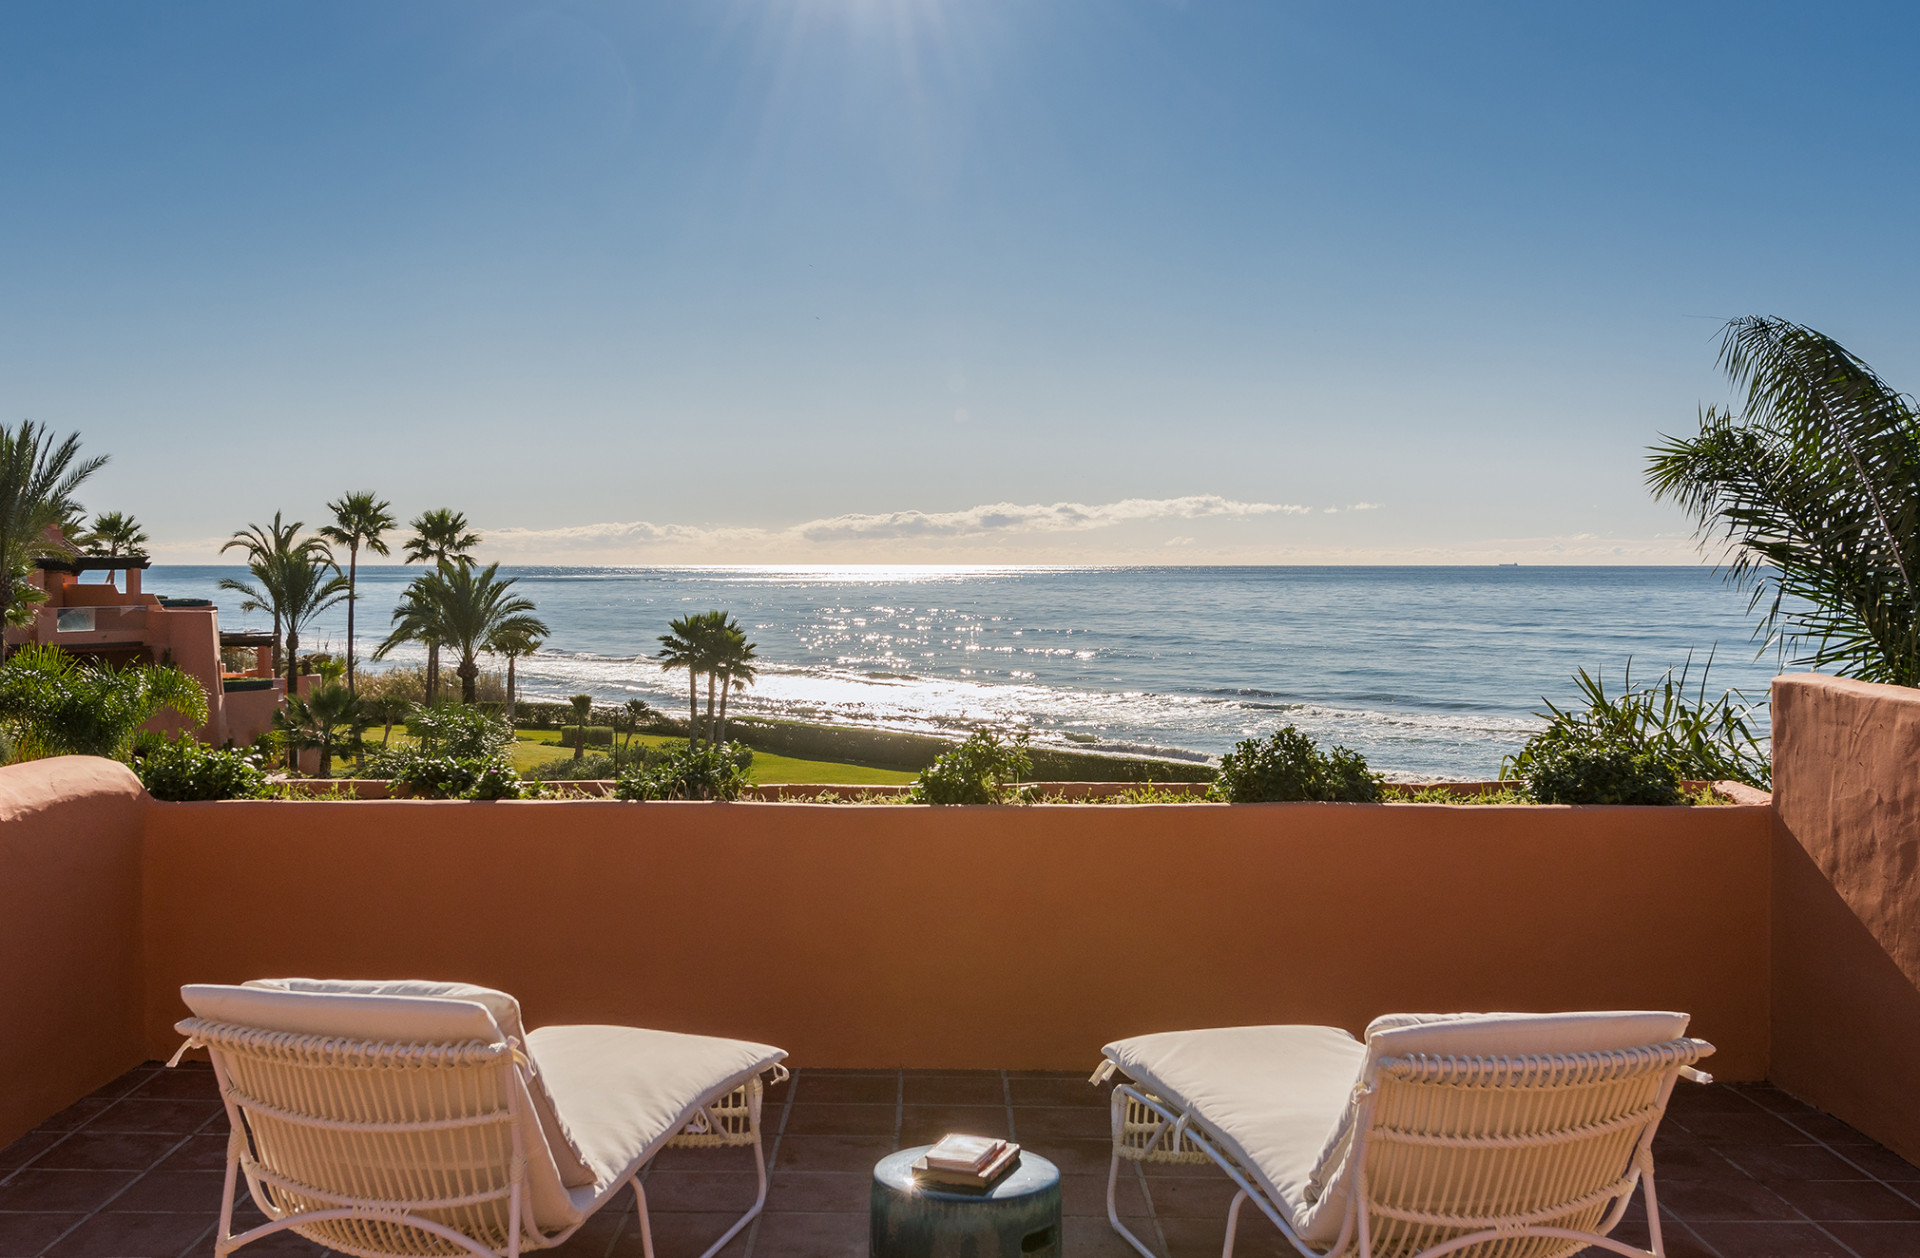 ARFAA700-1 - Stunning frontline beach penthouse for sale in Marbella, first o...